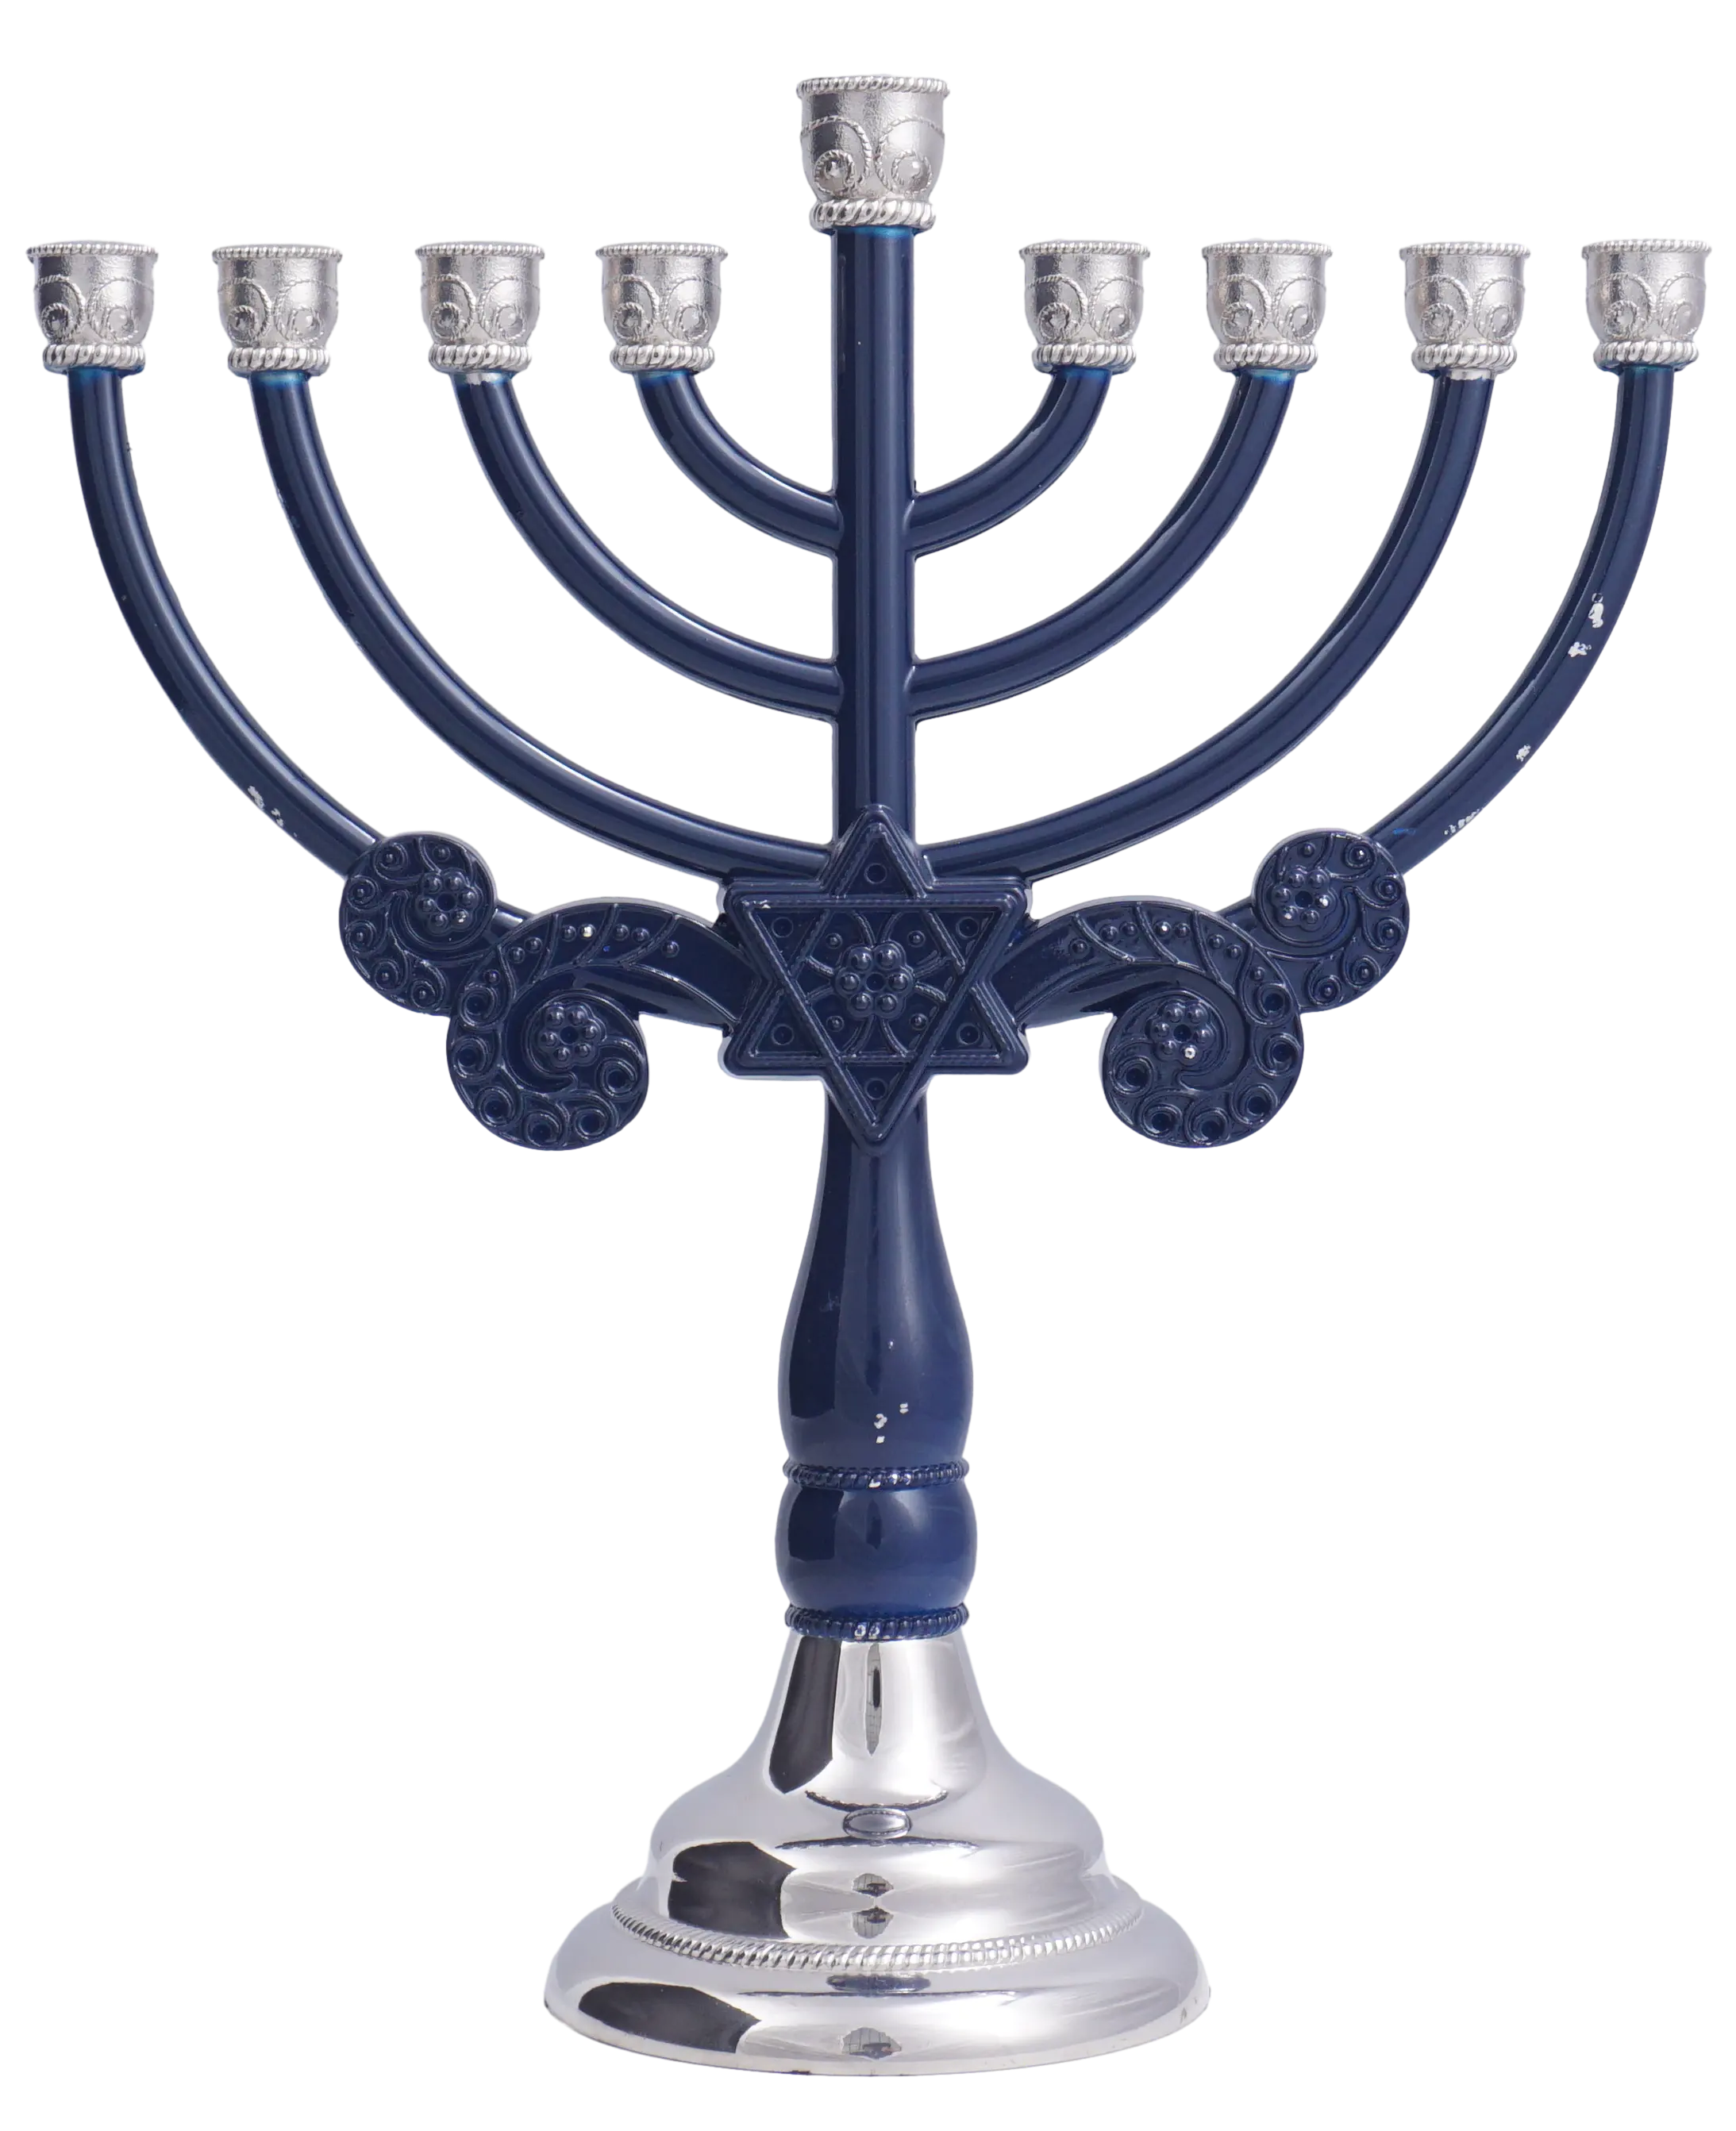 9 Arms Metal Candle Holder Judaica Hanukkah 12 Tribes Gold Menorah Candelabra For Wedding Home Religious Table Centerpieces